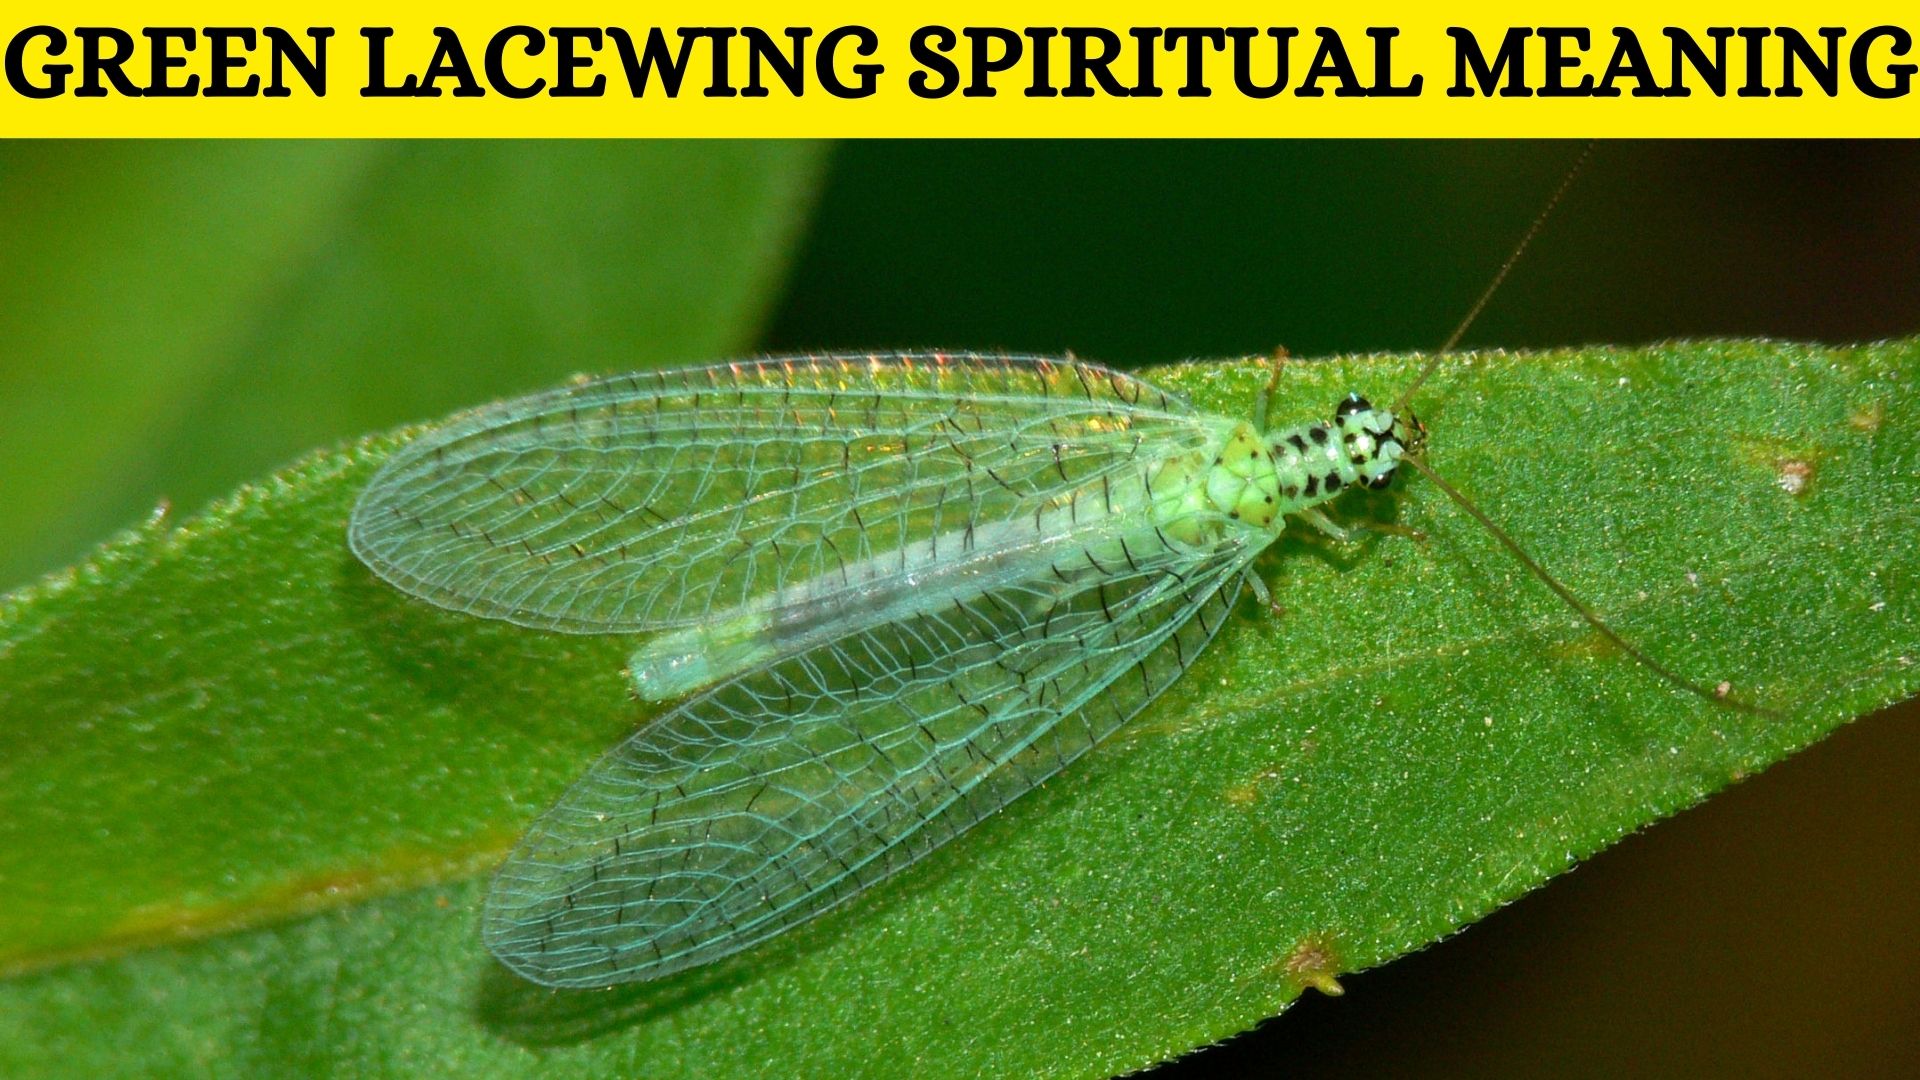 Green Lacewing Spiritual Meaning - Symbol Of Hope, Renewal, And New Beginnings